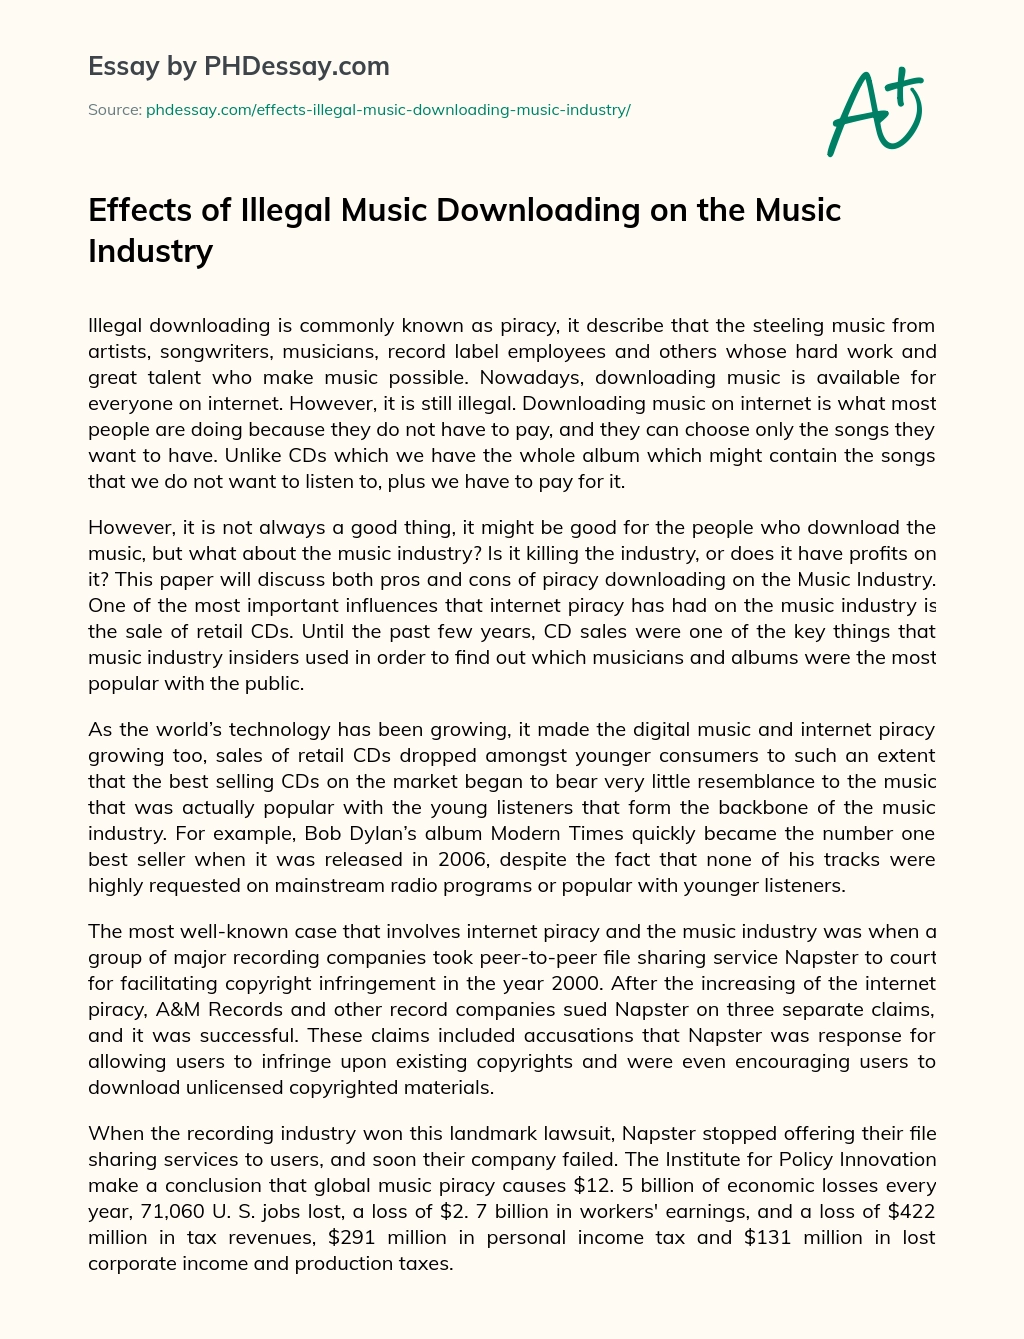 Effects of Illegal Music Downloading on the Music Industry essay